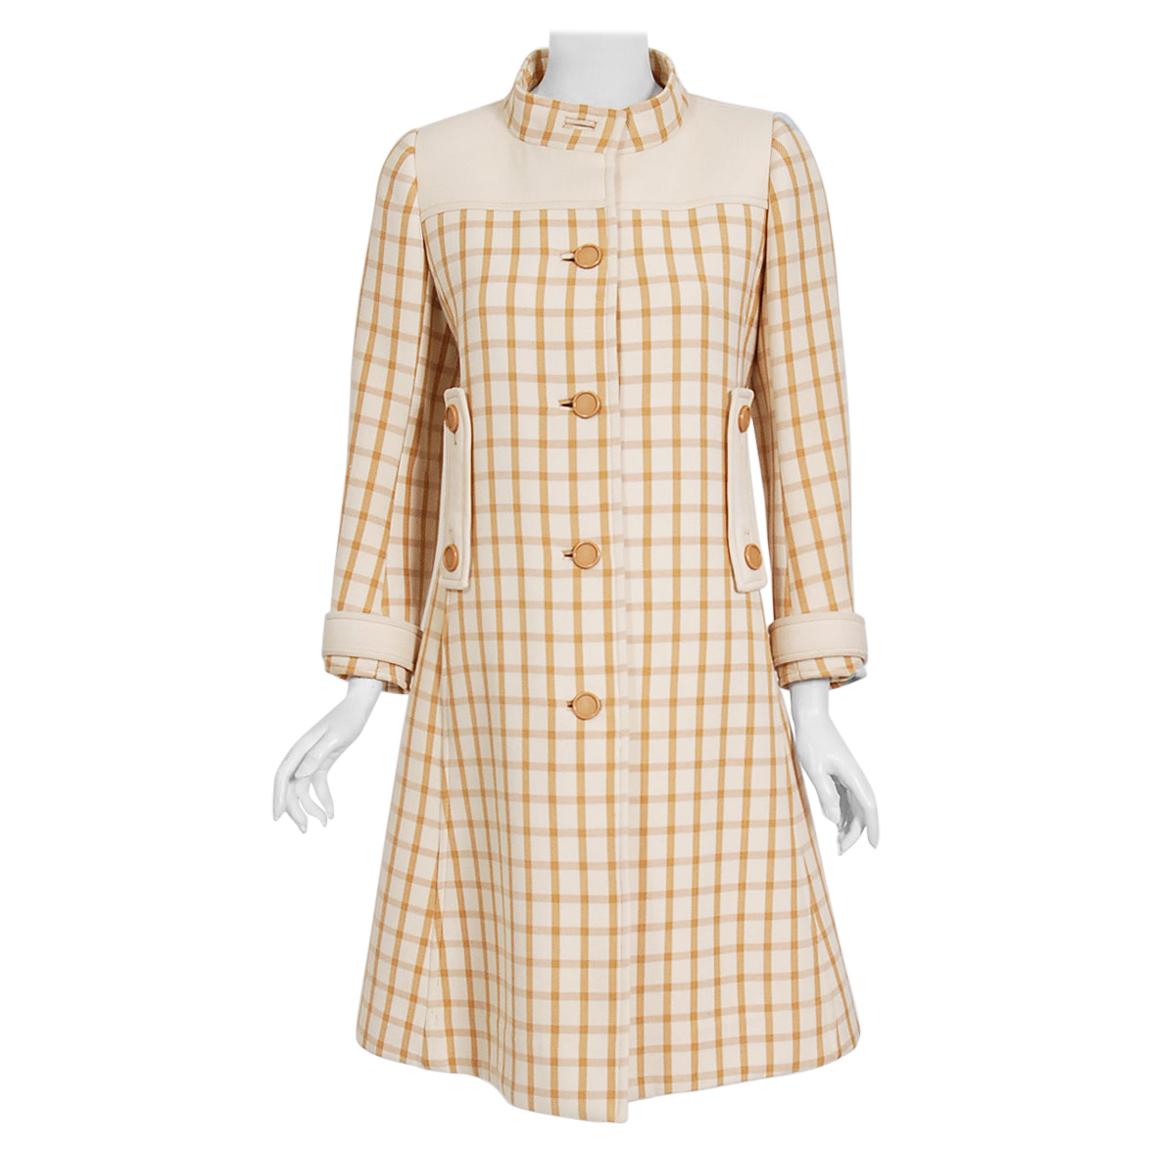 Vintage 1967 Courreges Couture Tan and Ivory Checkered Wool Mod Jacket Coat  